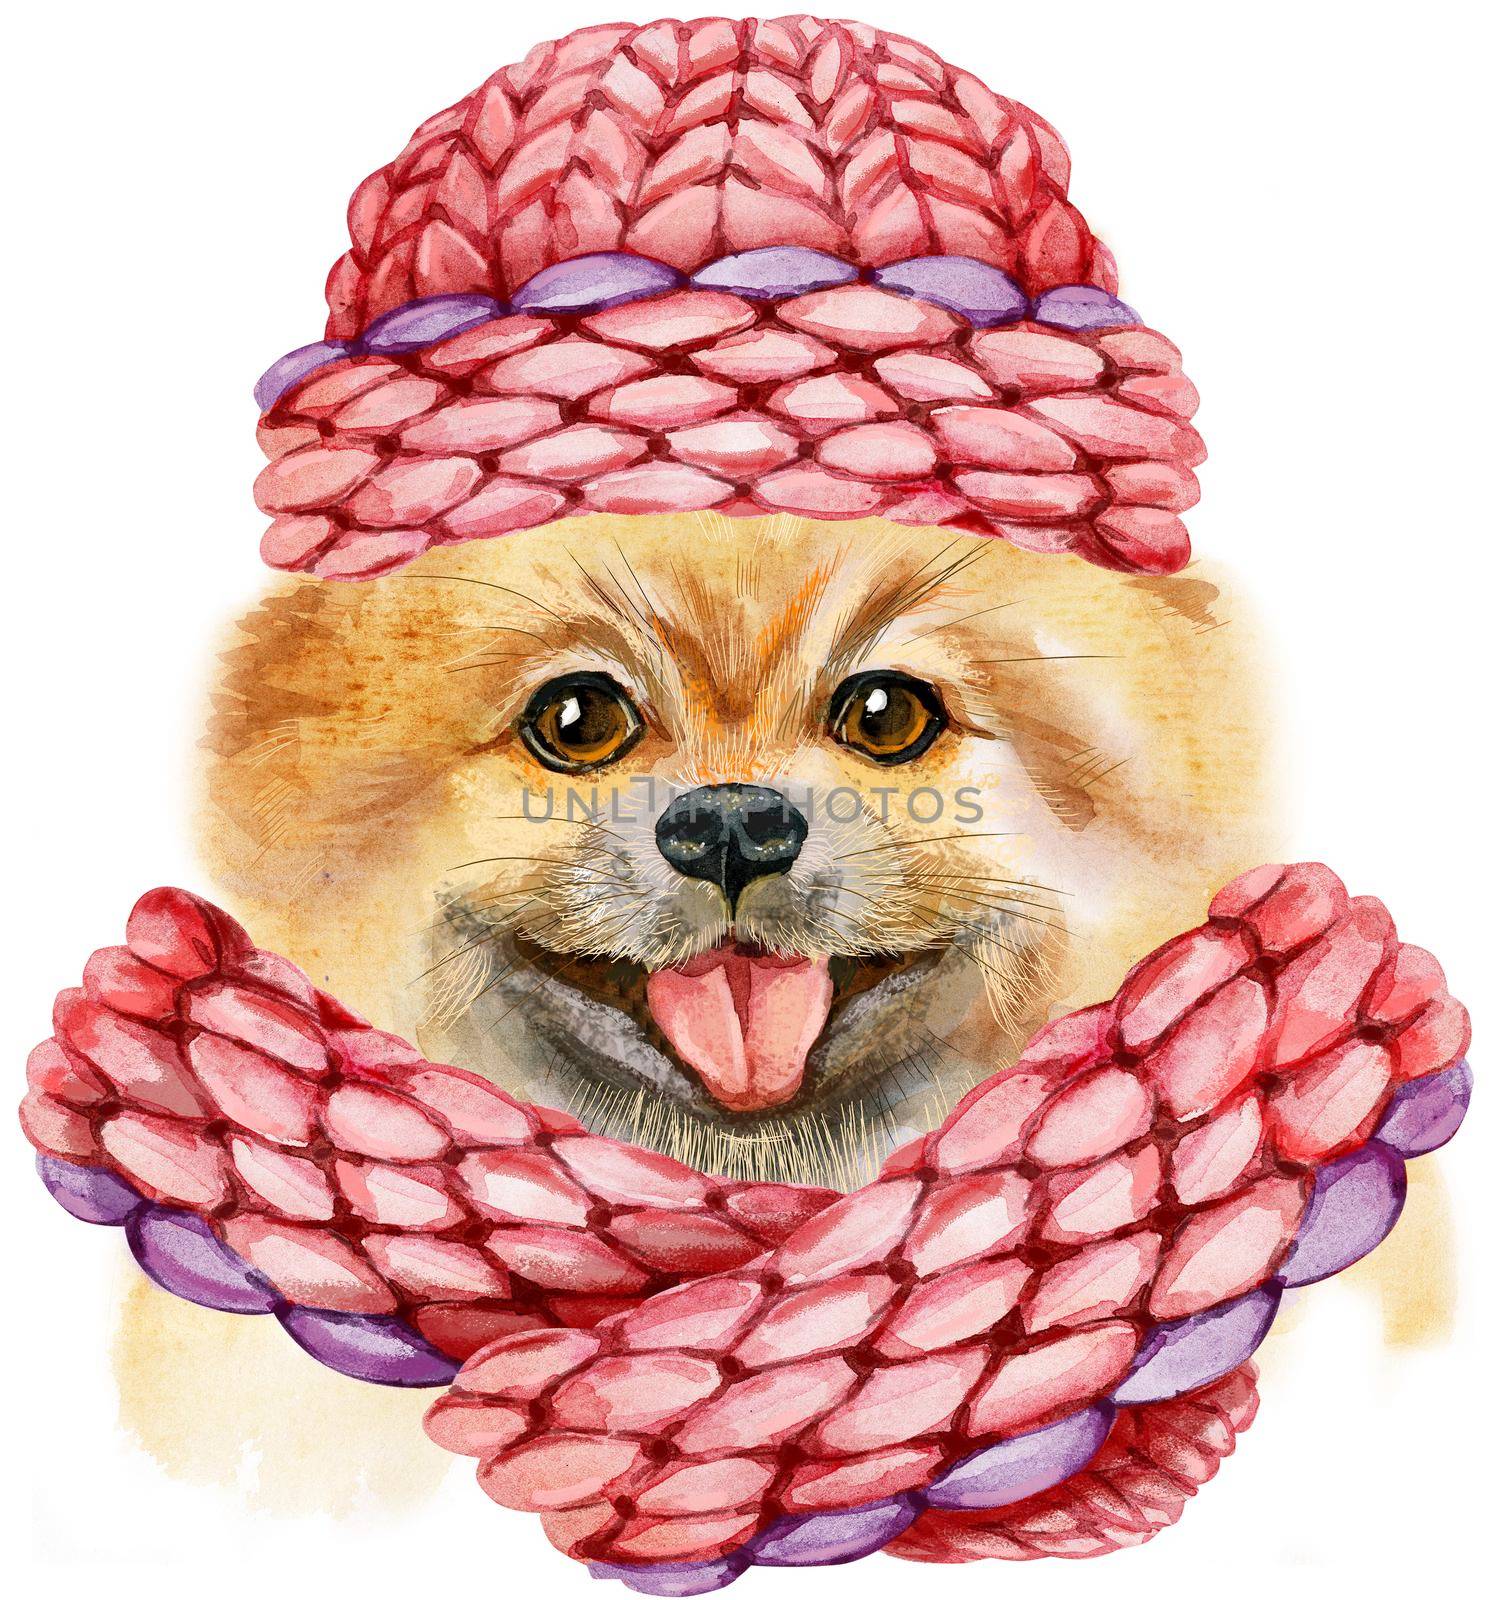 Cute Dog with pink knitted hat. Dog T-shirt graphics. watercolor pomeranian spitz illustration